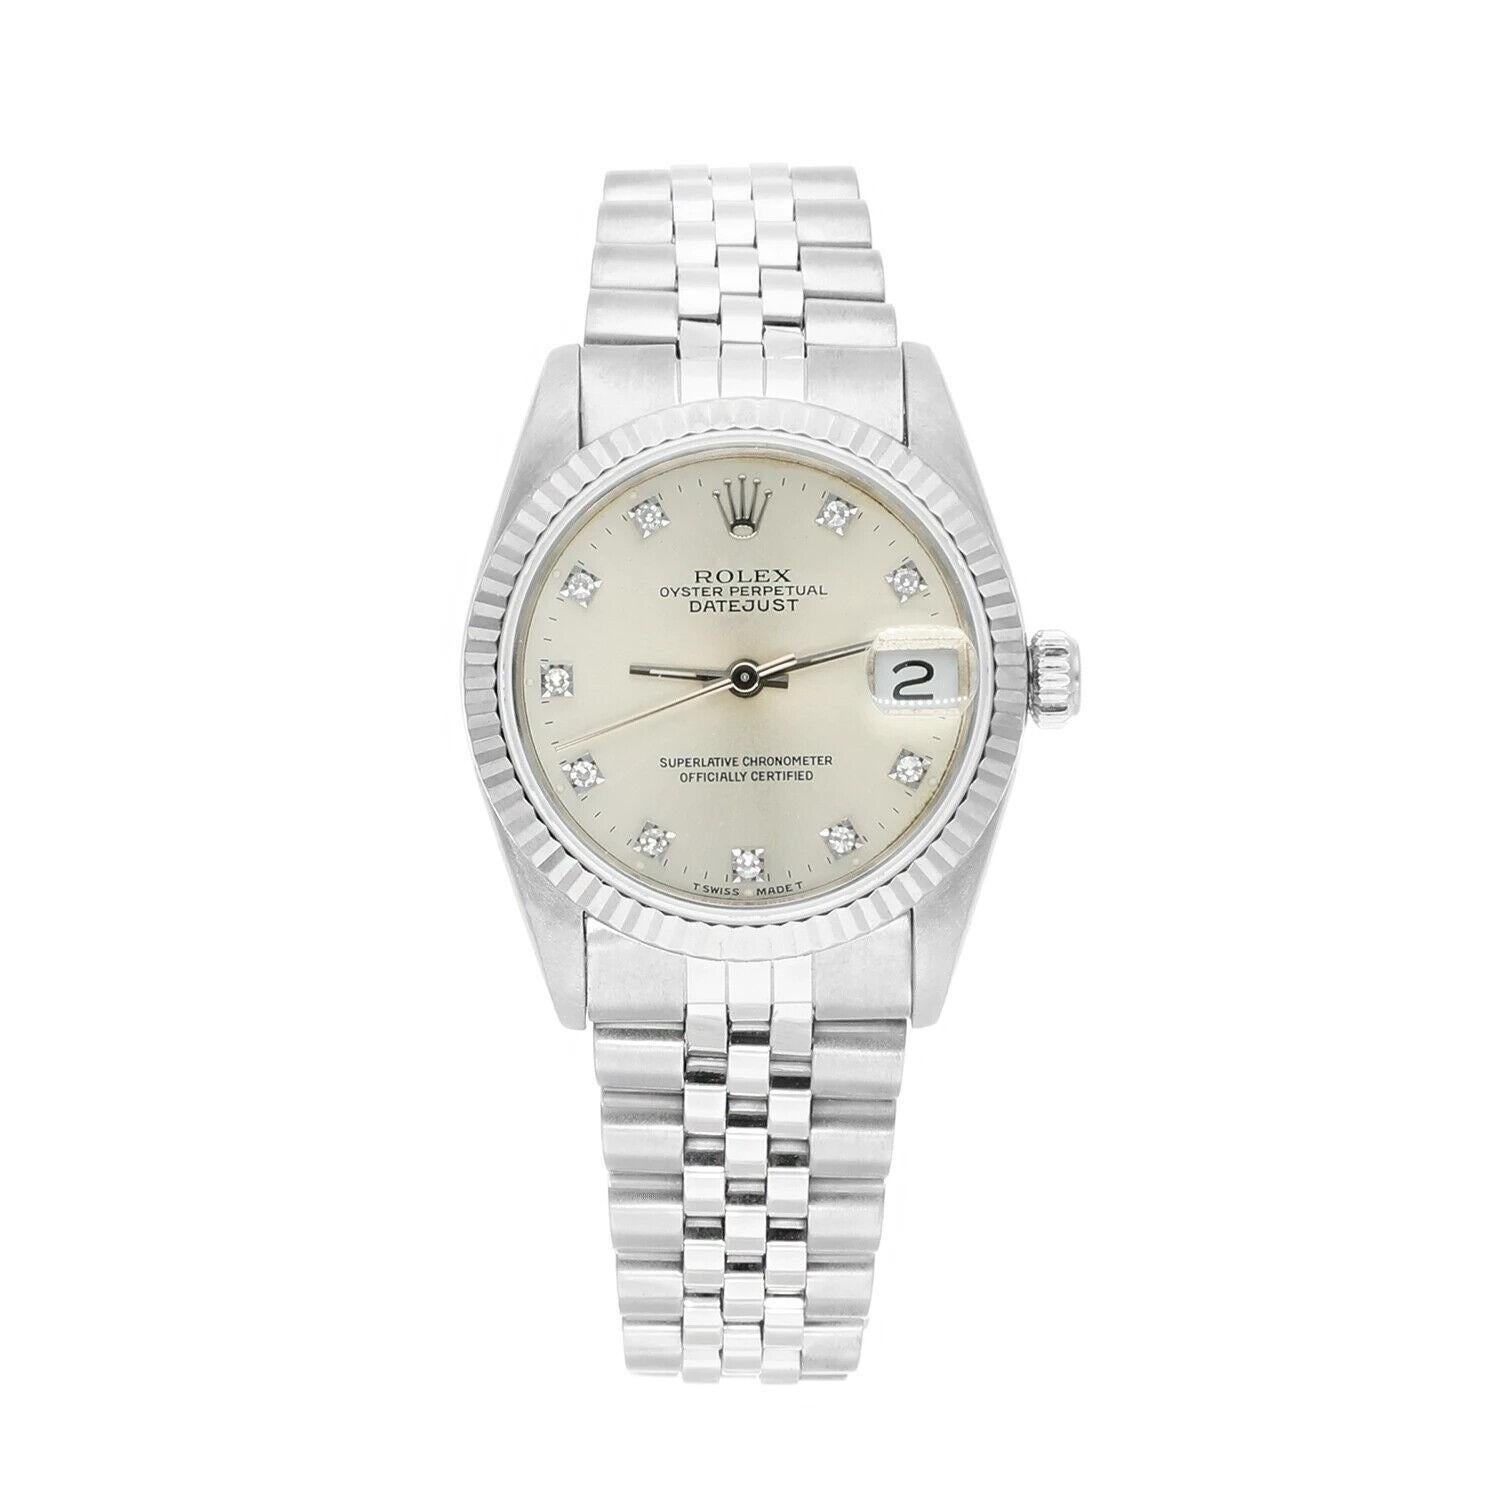 Rolex Datejust 31mm Silver Diamond Dial Stainless Steel Watch White Gold Bezel, Circa 1990.
This watch has been professionally polished, serviced and is in excellent overall condition. There are absolutely no visible scratches or blemishes.